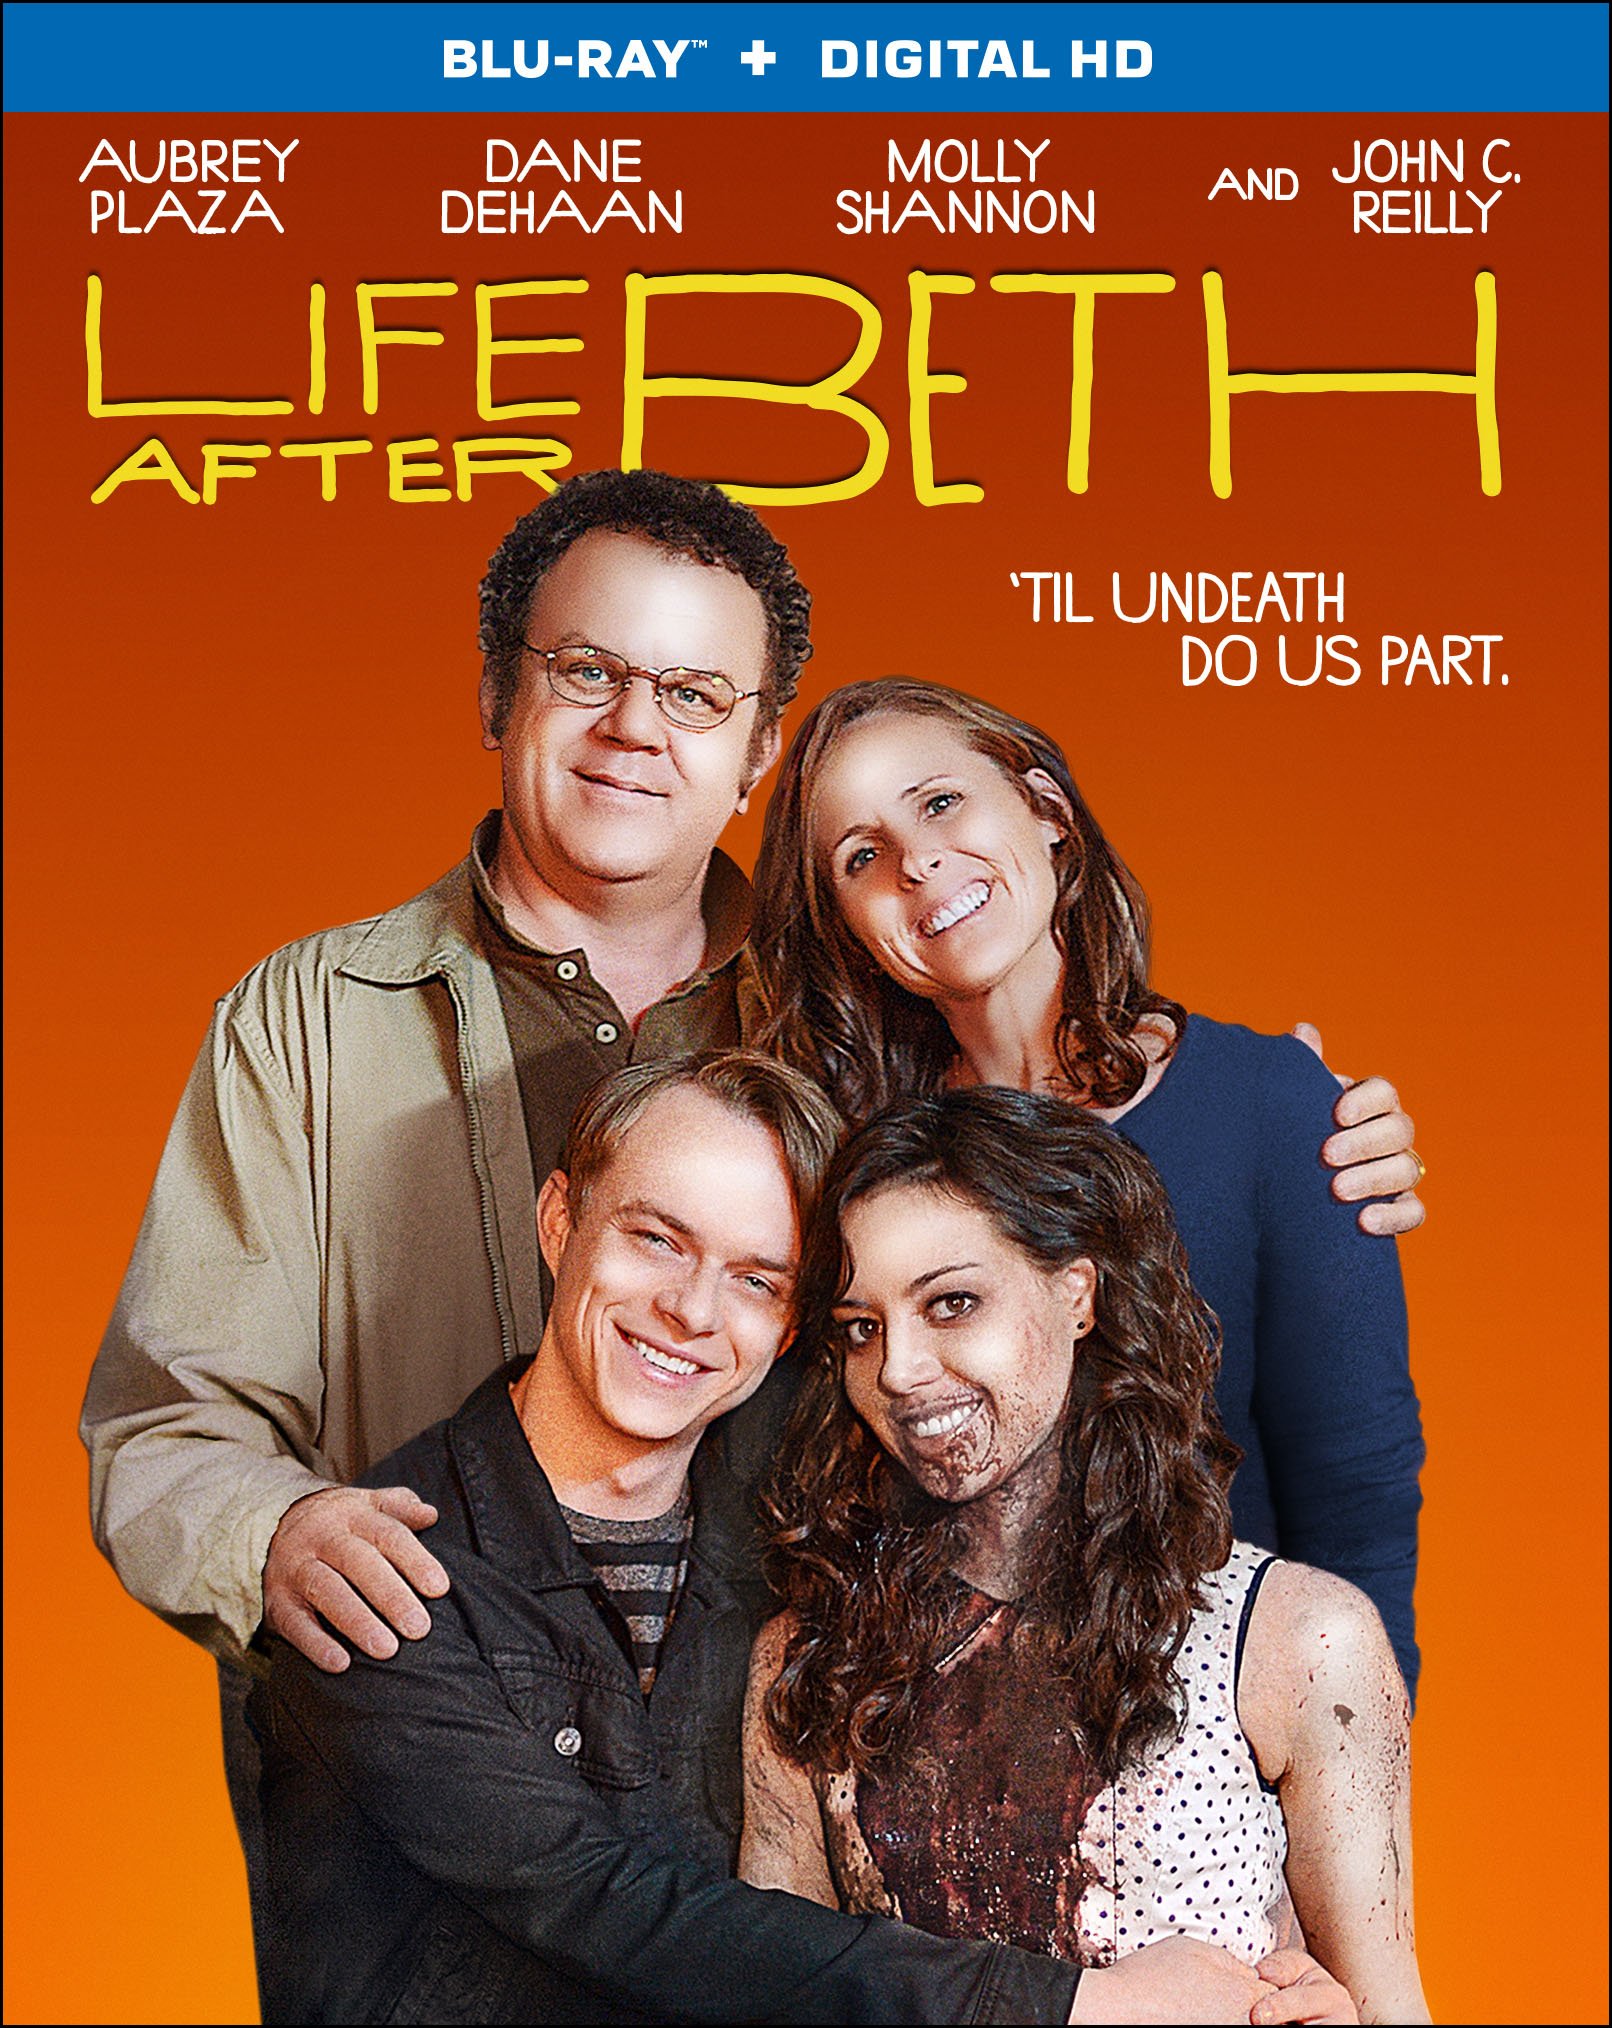 life-after-beth-blu-ray-cover-26